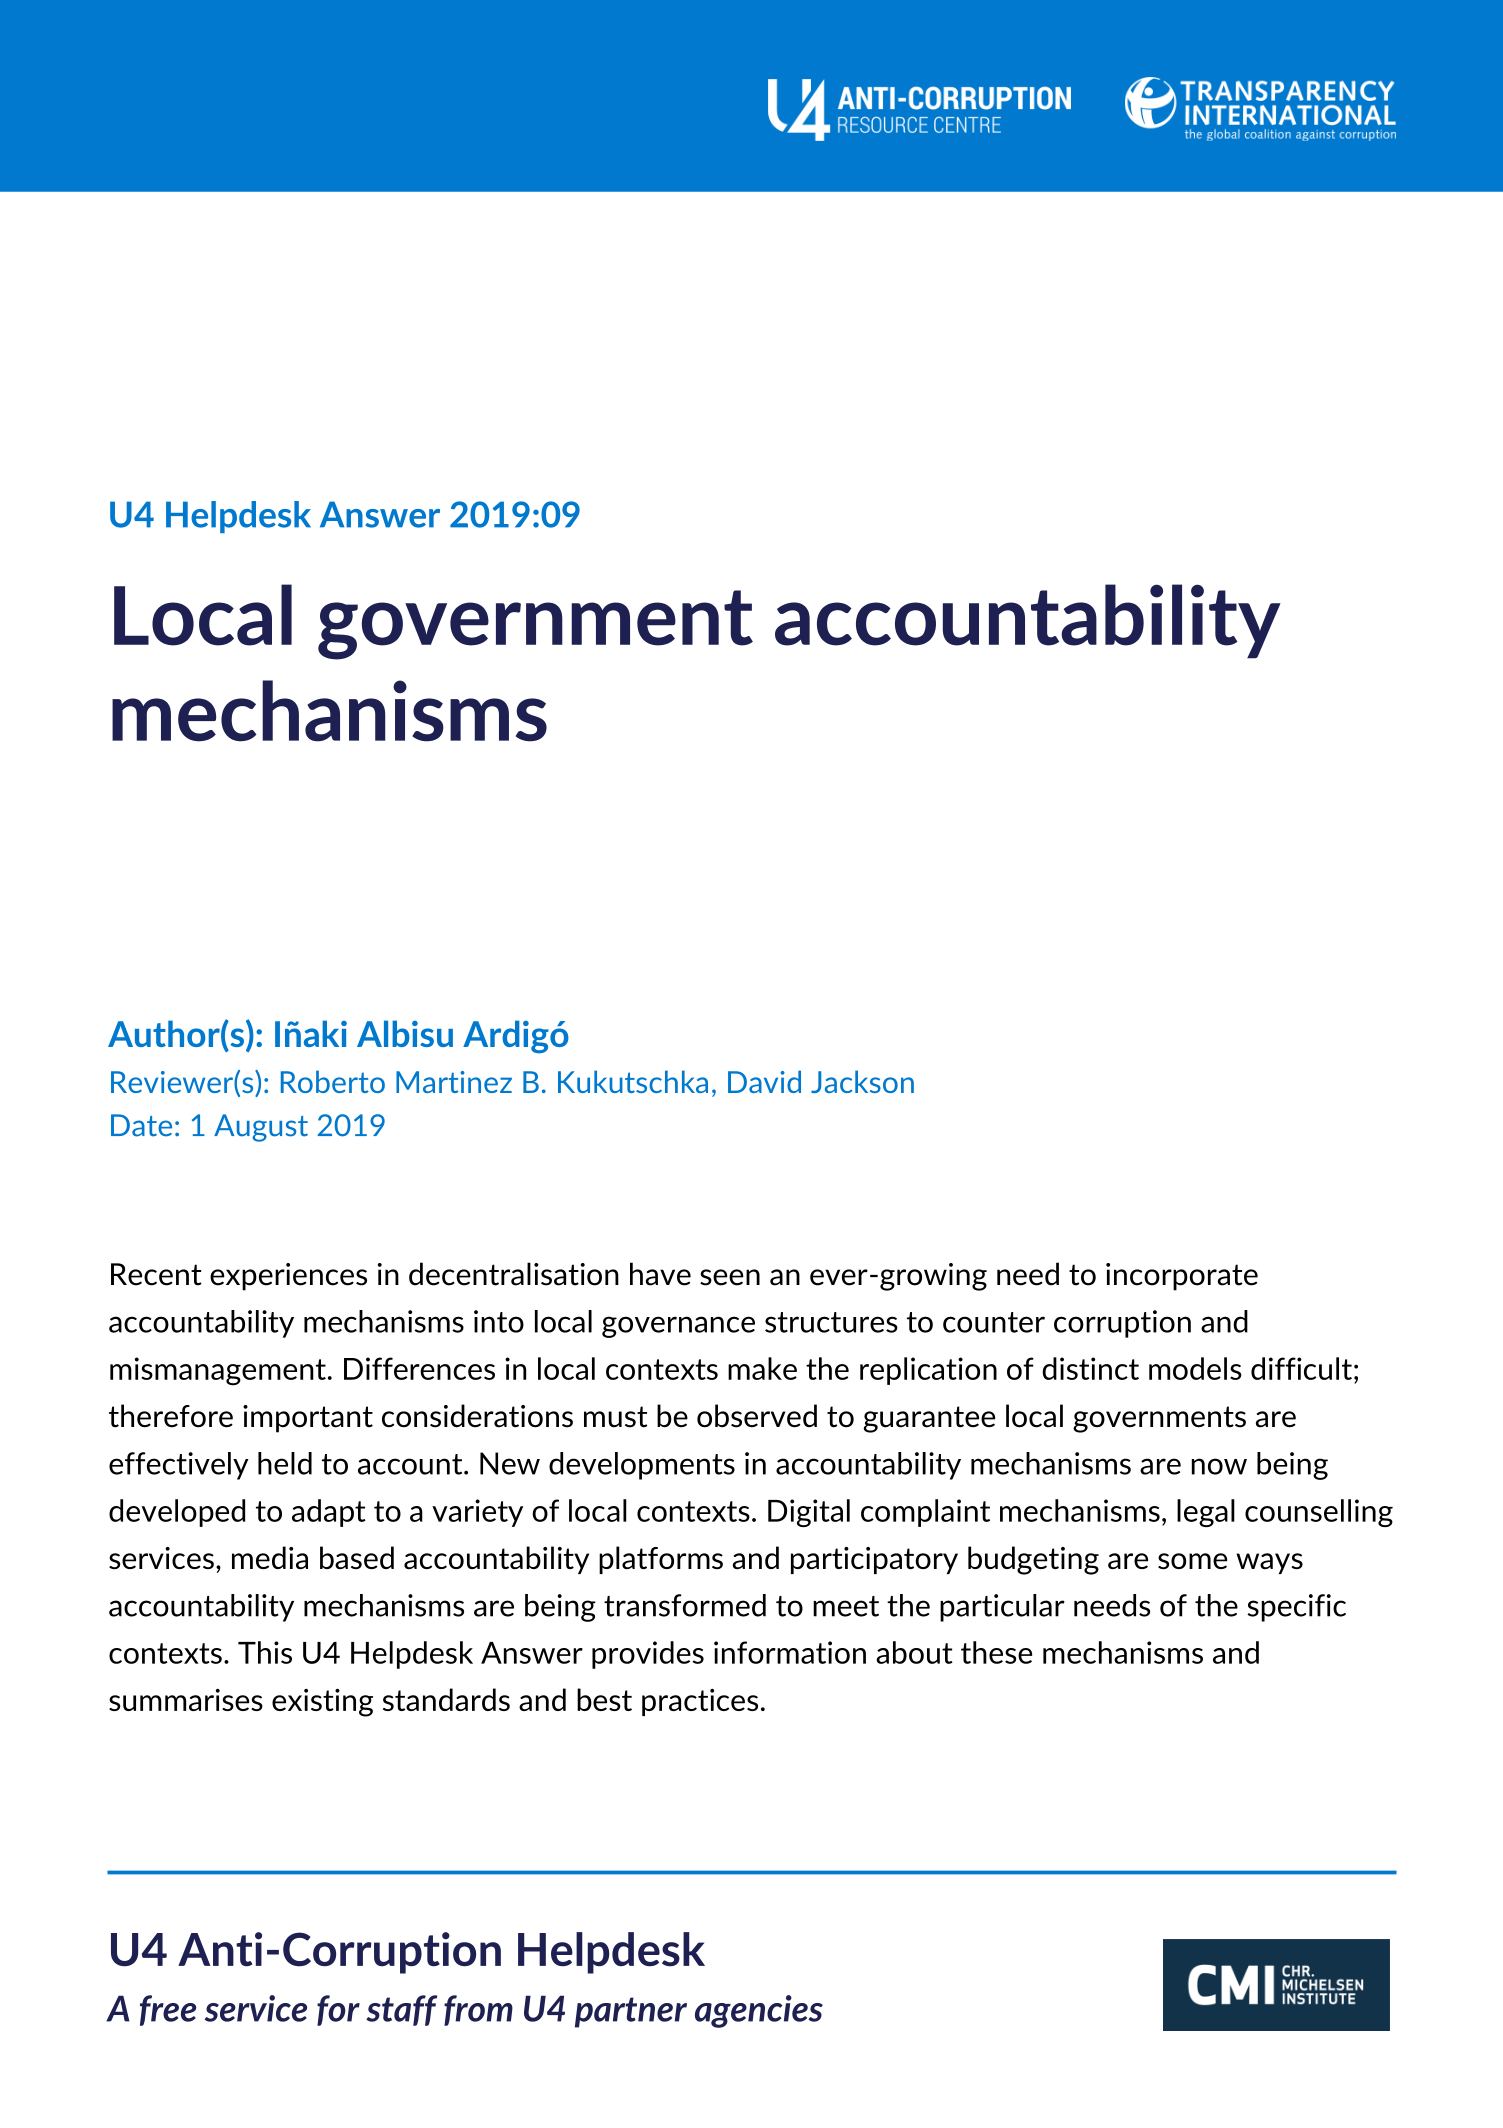 Local government accountability mechanisms